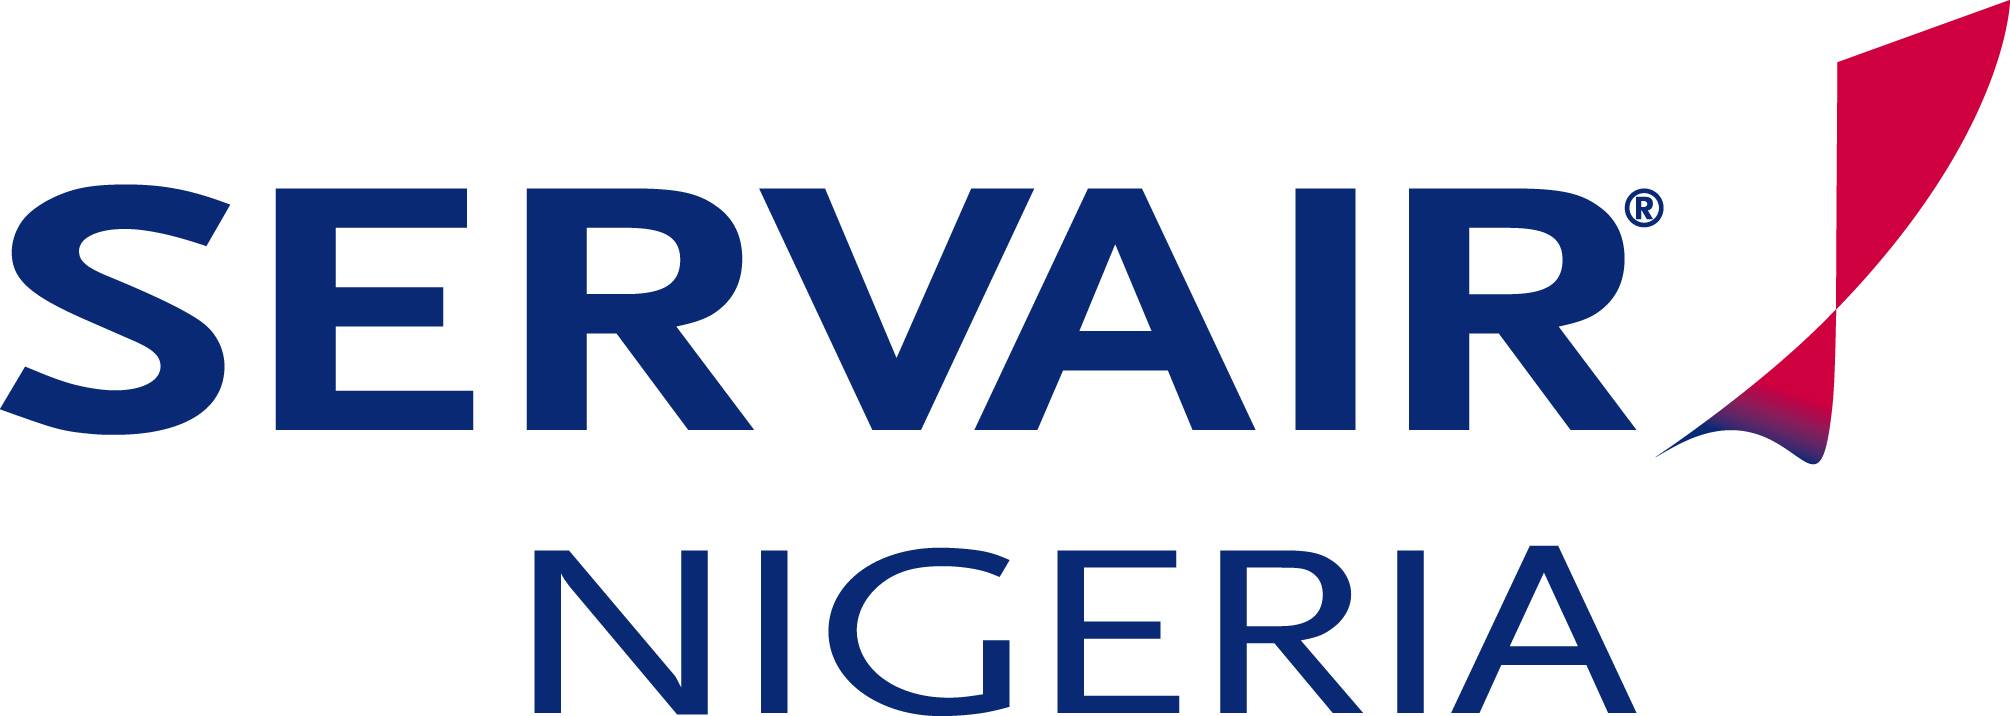 Pan African Catering Services - Servair Nigeria